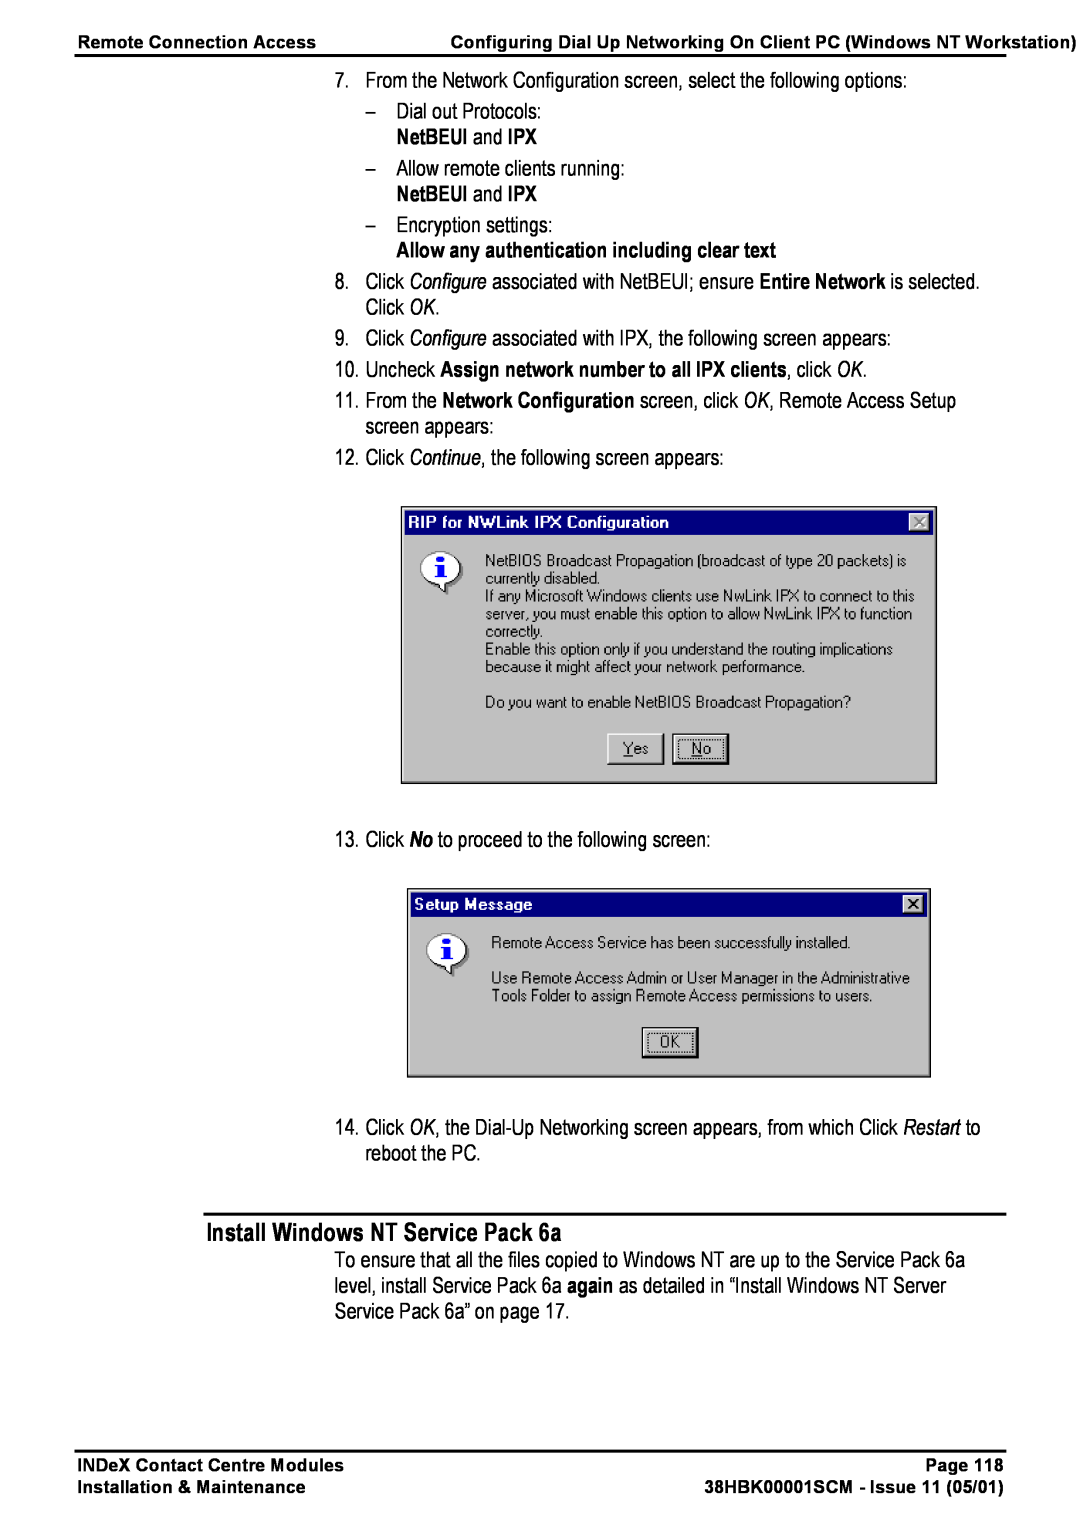 Avaya 38HBK00001SCM manual Uncheck Assign network number to all IPX clients, click OK, Install Windows NT Service Pack 6a 